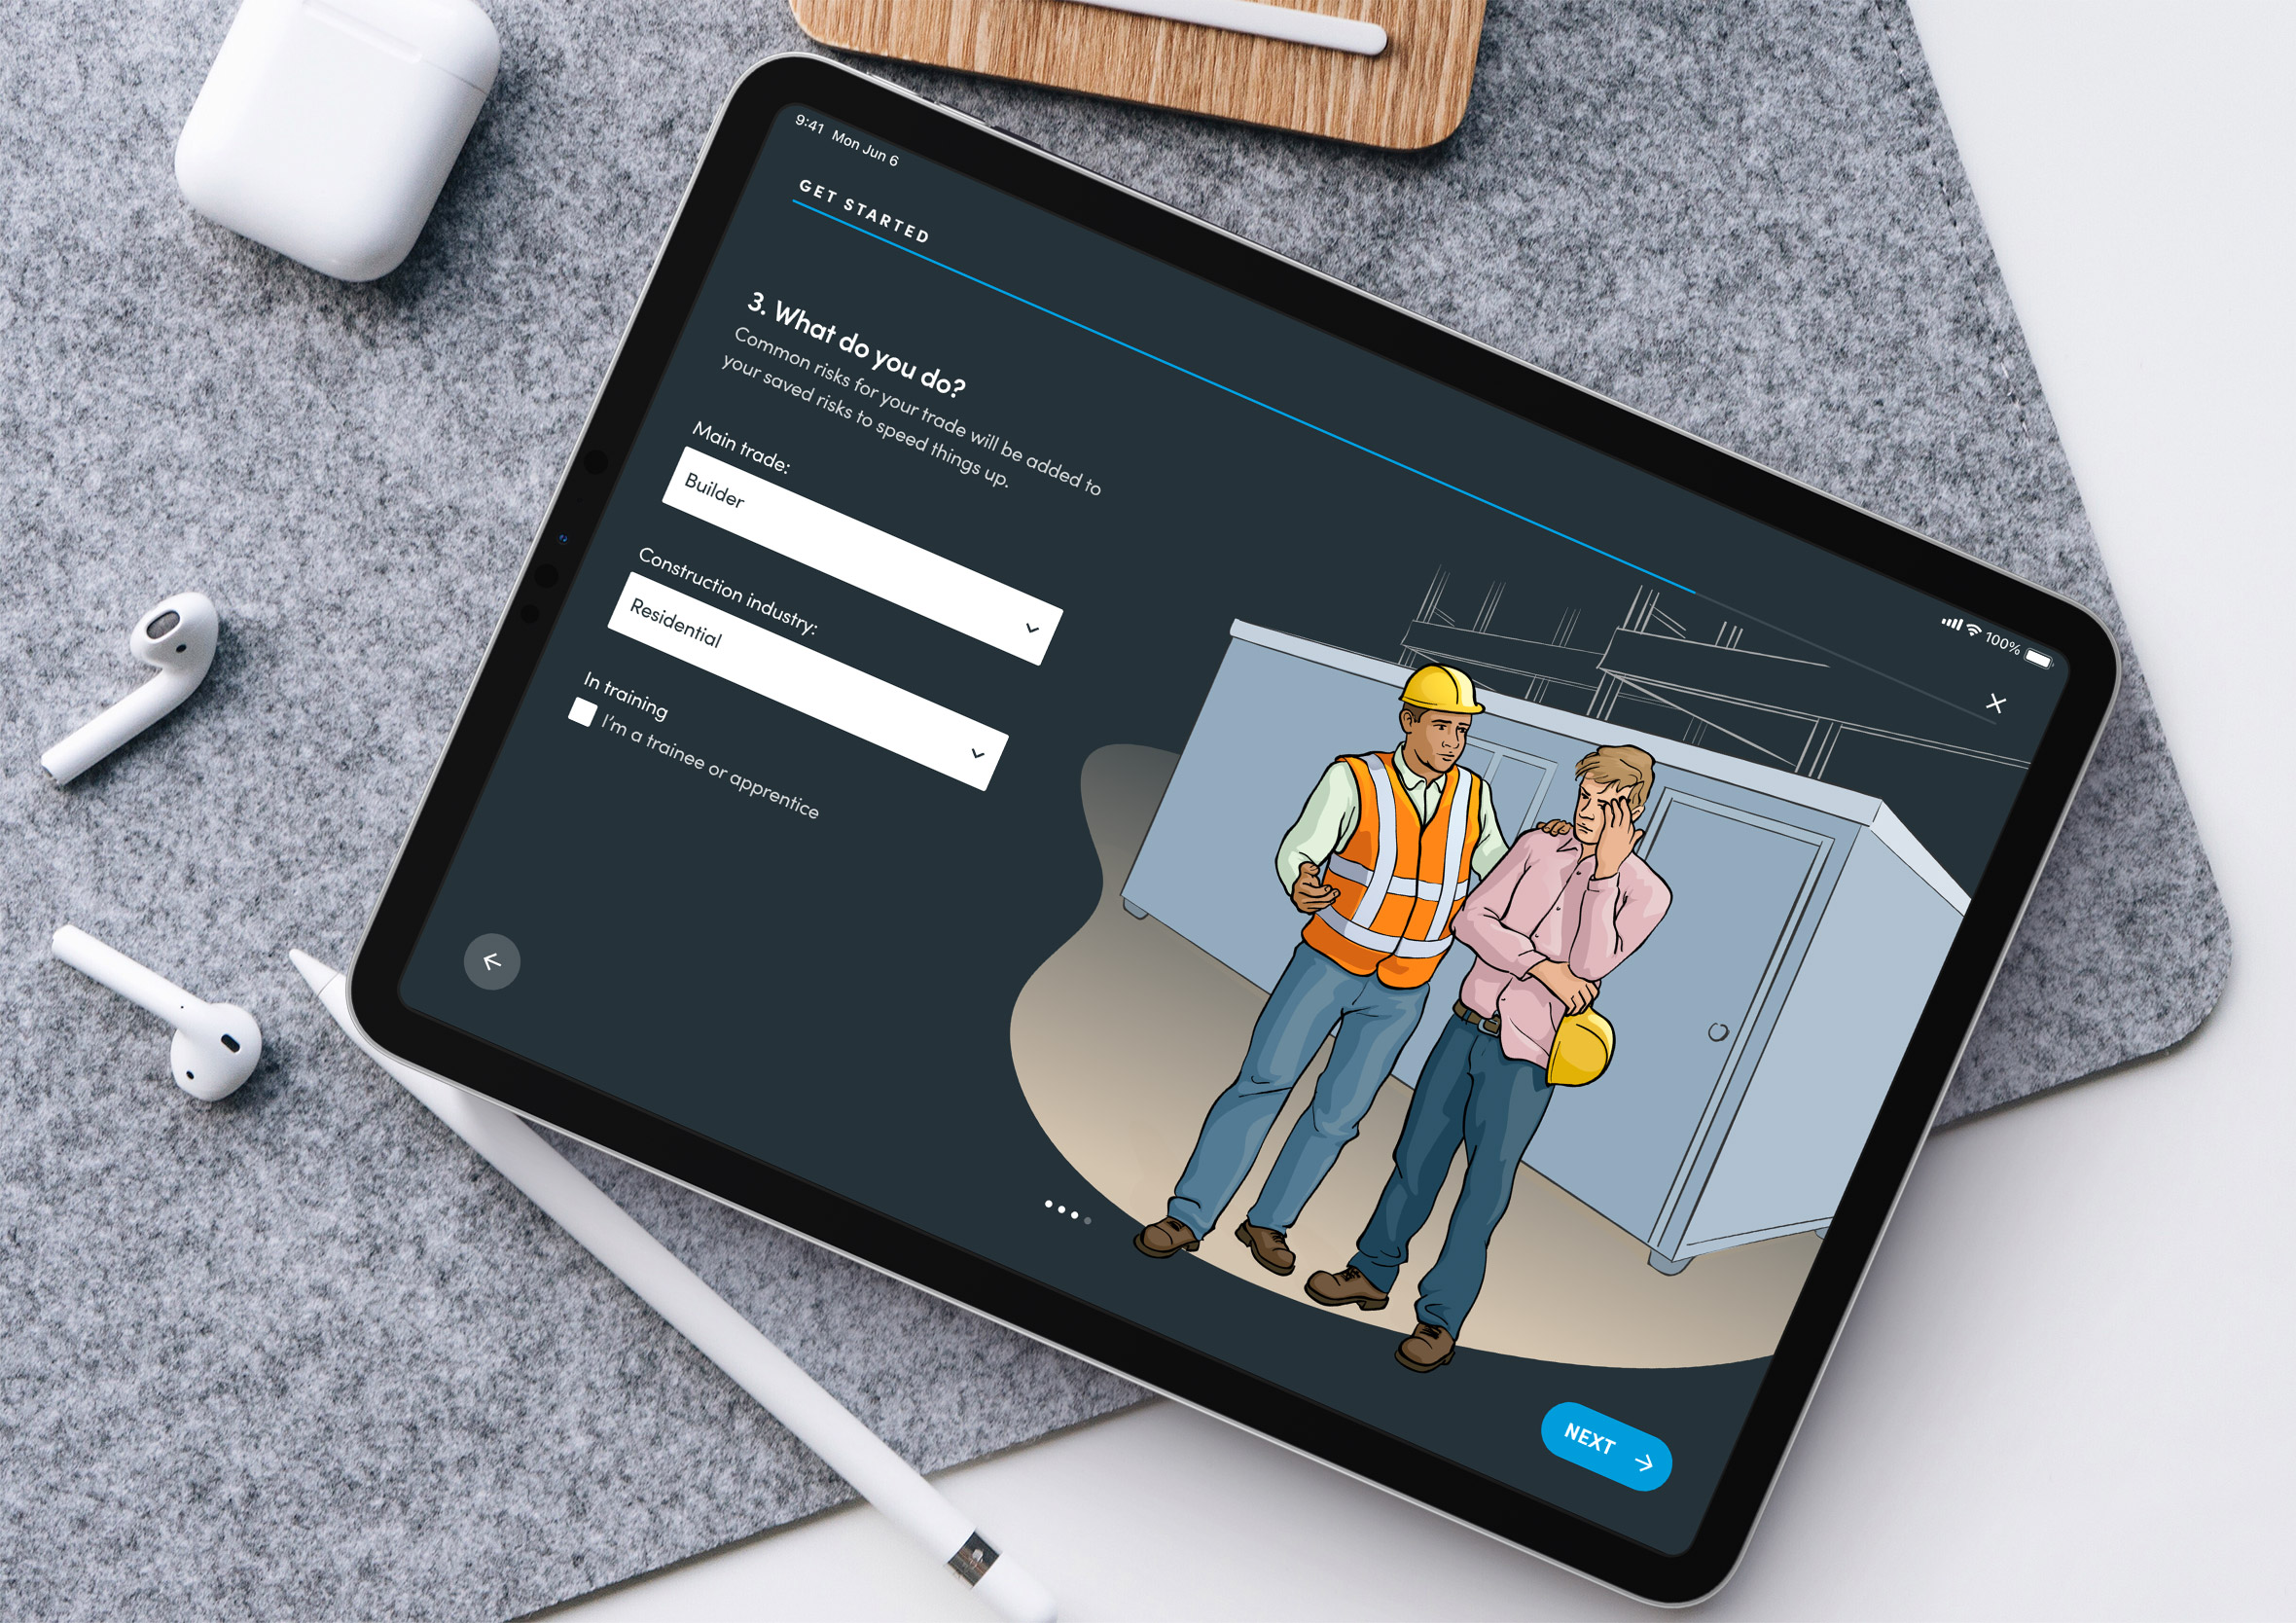 health-and-safety-app-home-ipad